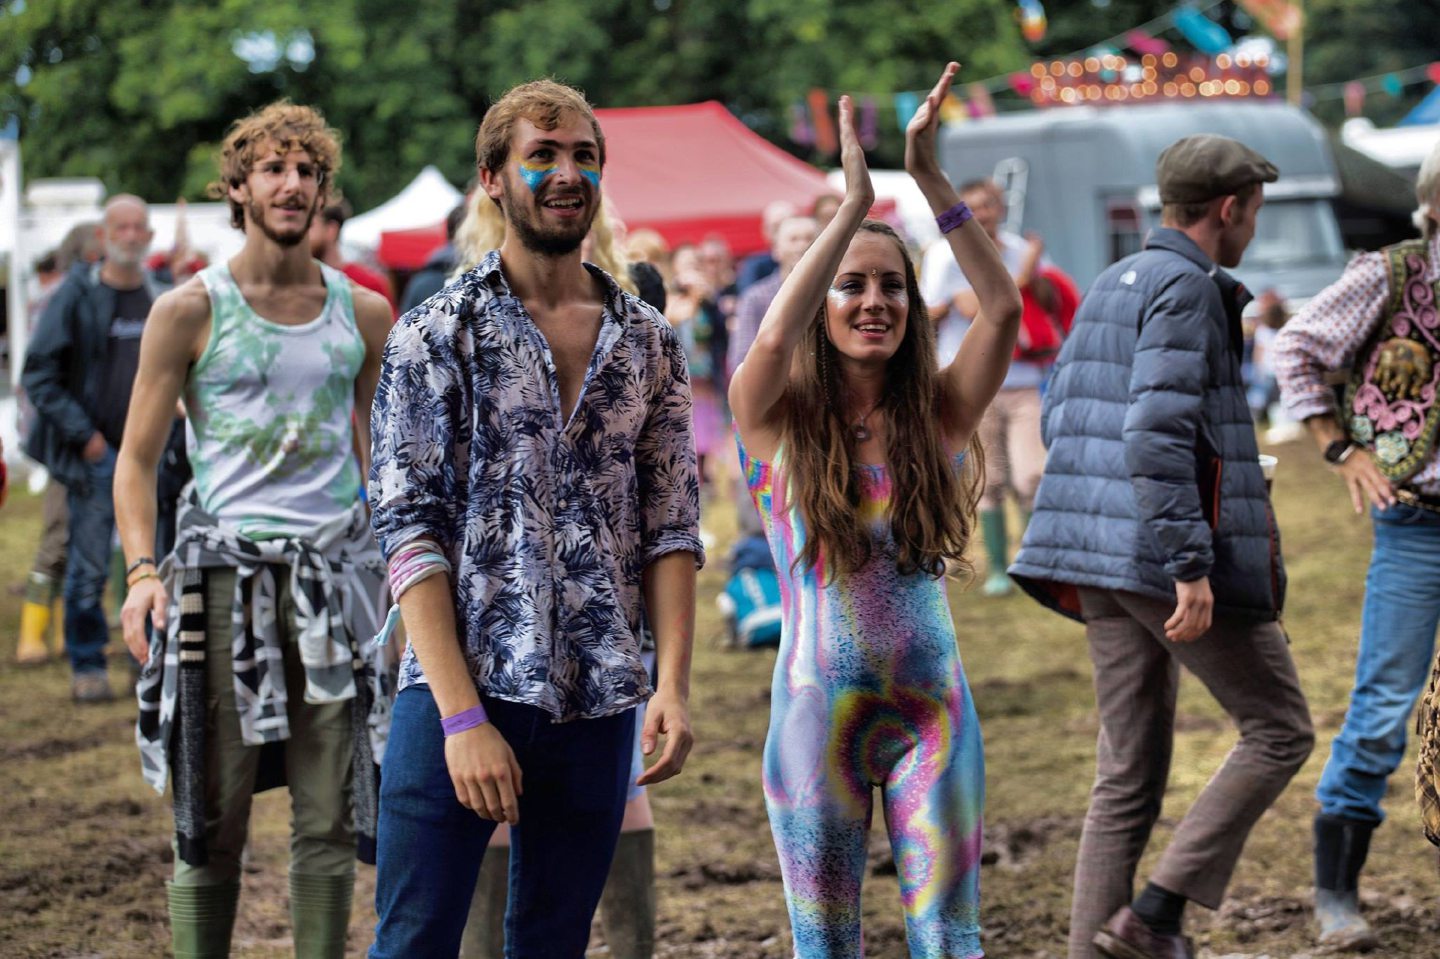 Festival-goers at Doune the Rabbit Hole. 